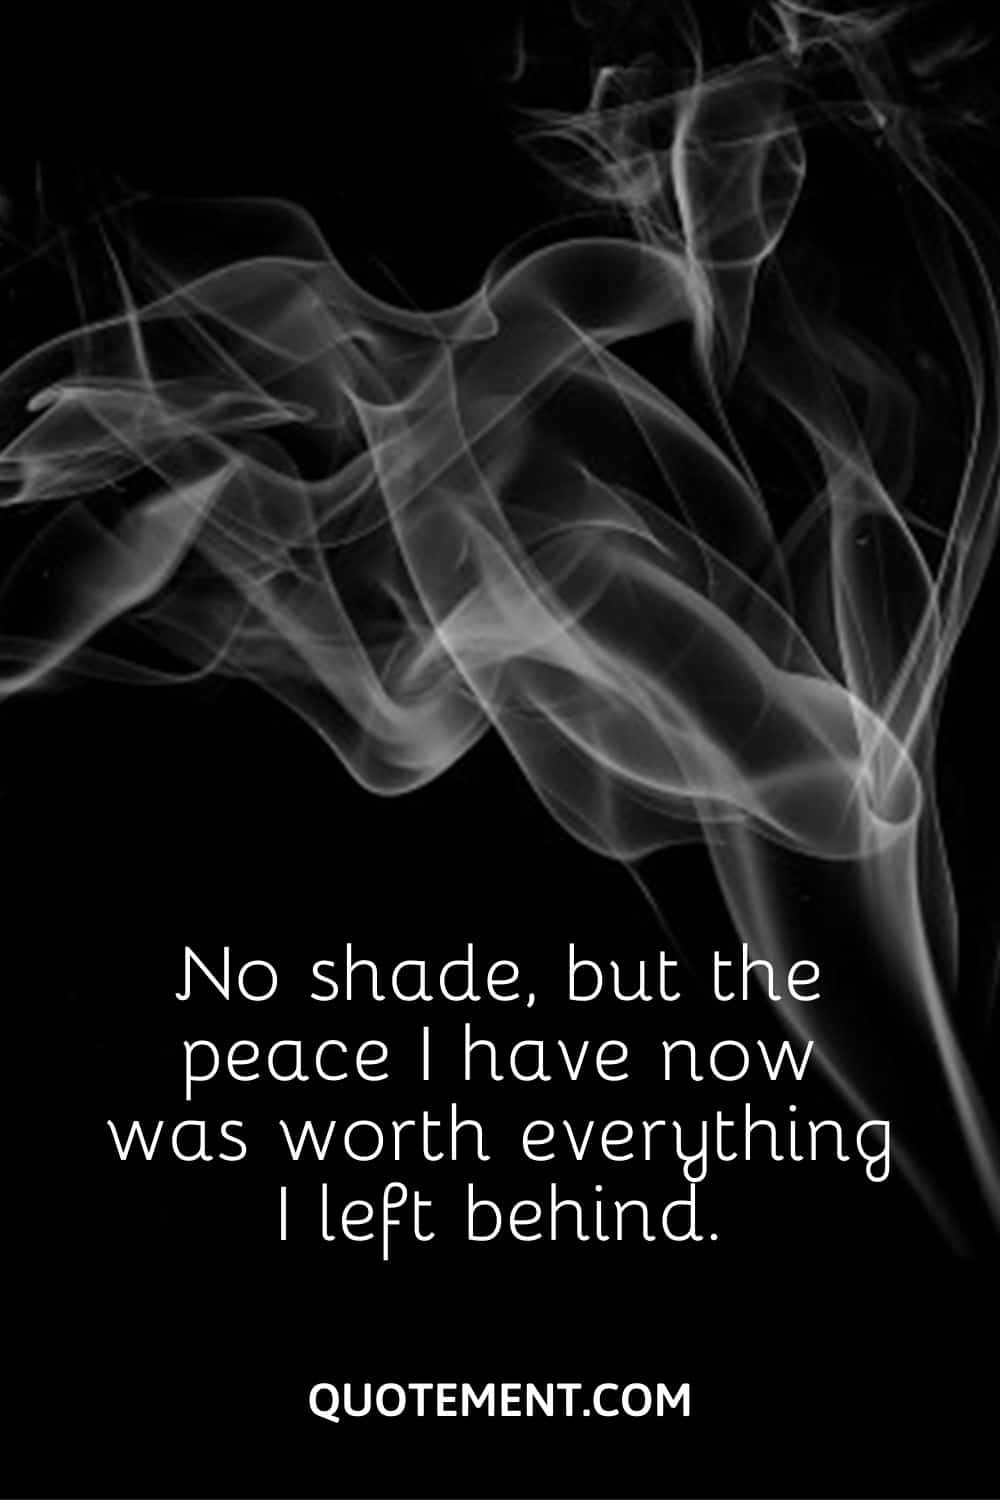 No shade, but the peace I have now was worth everything I left behind